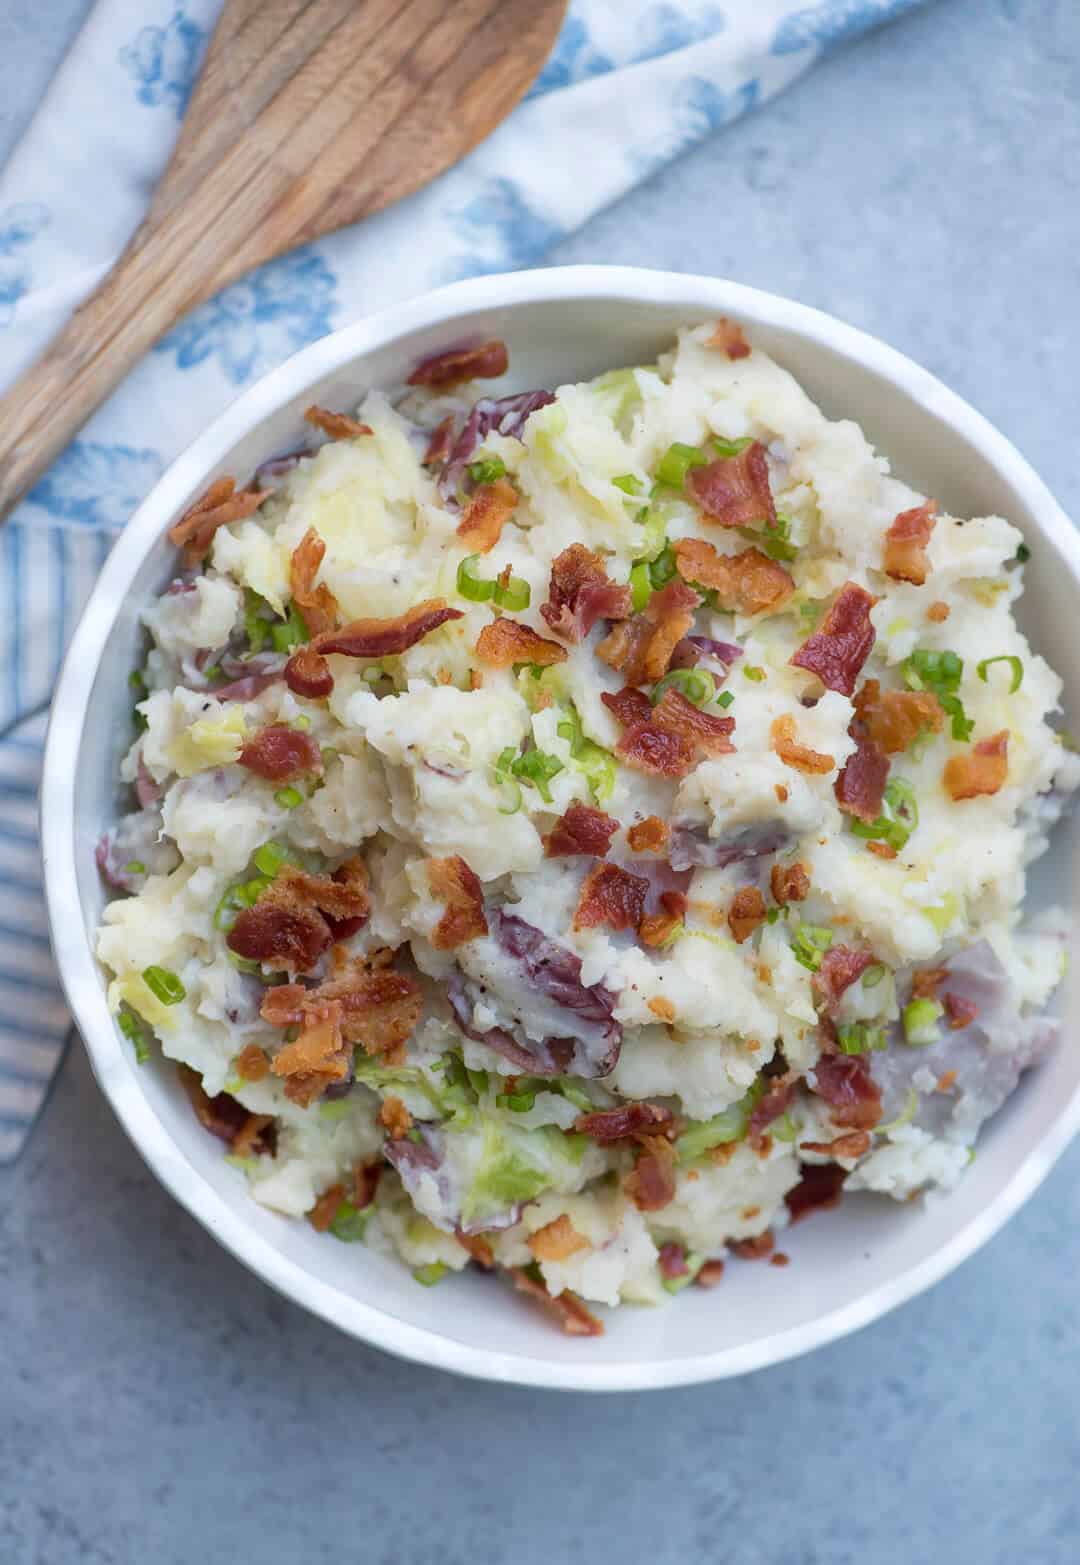 Irish Colcannon Potatoes in a white bowl with a floral blue and white cloth and wooden spoon.